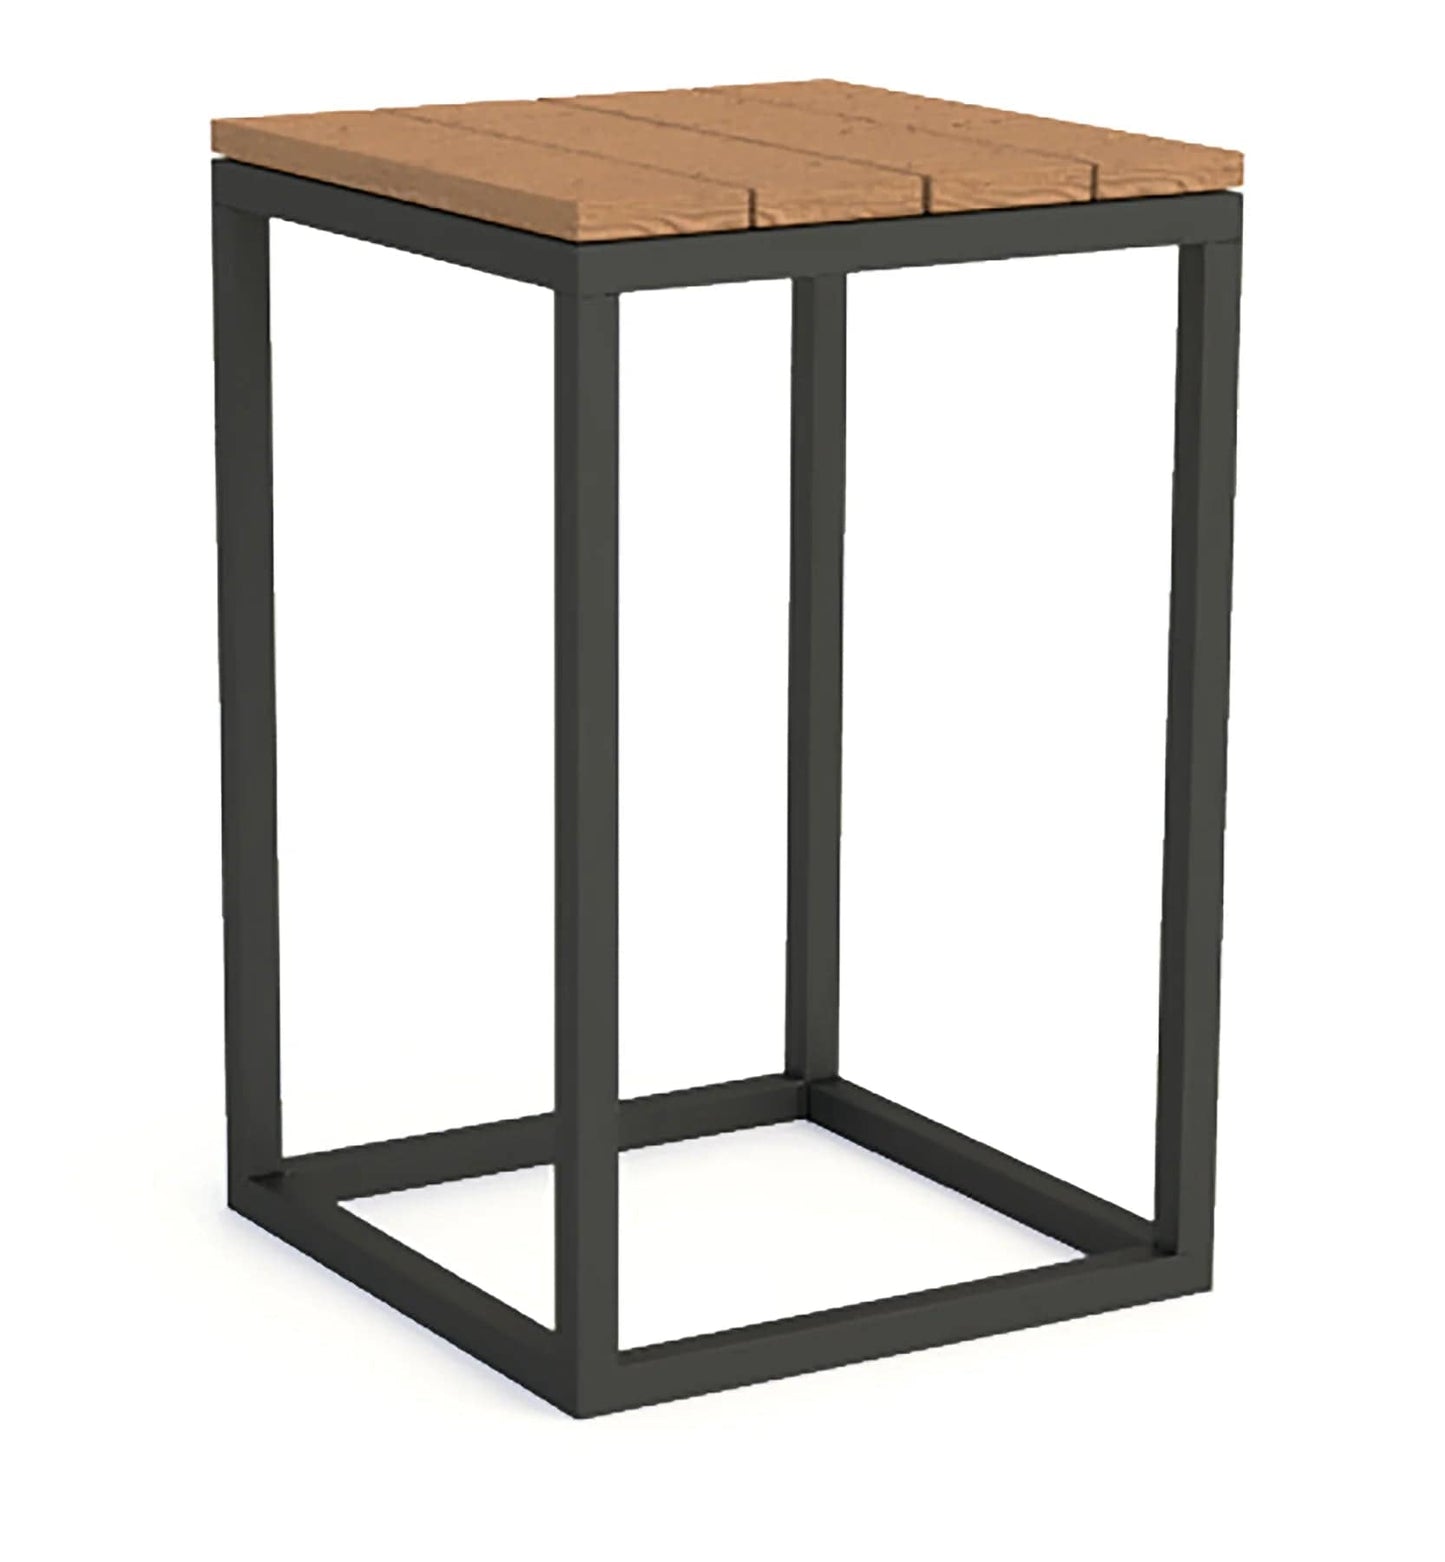 Gili Side Table with full circumference welds